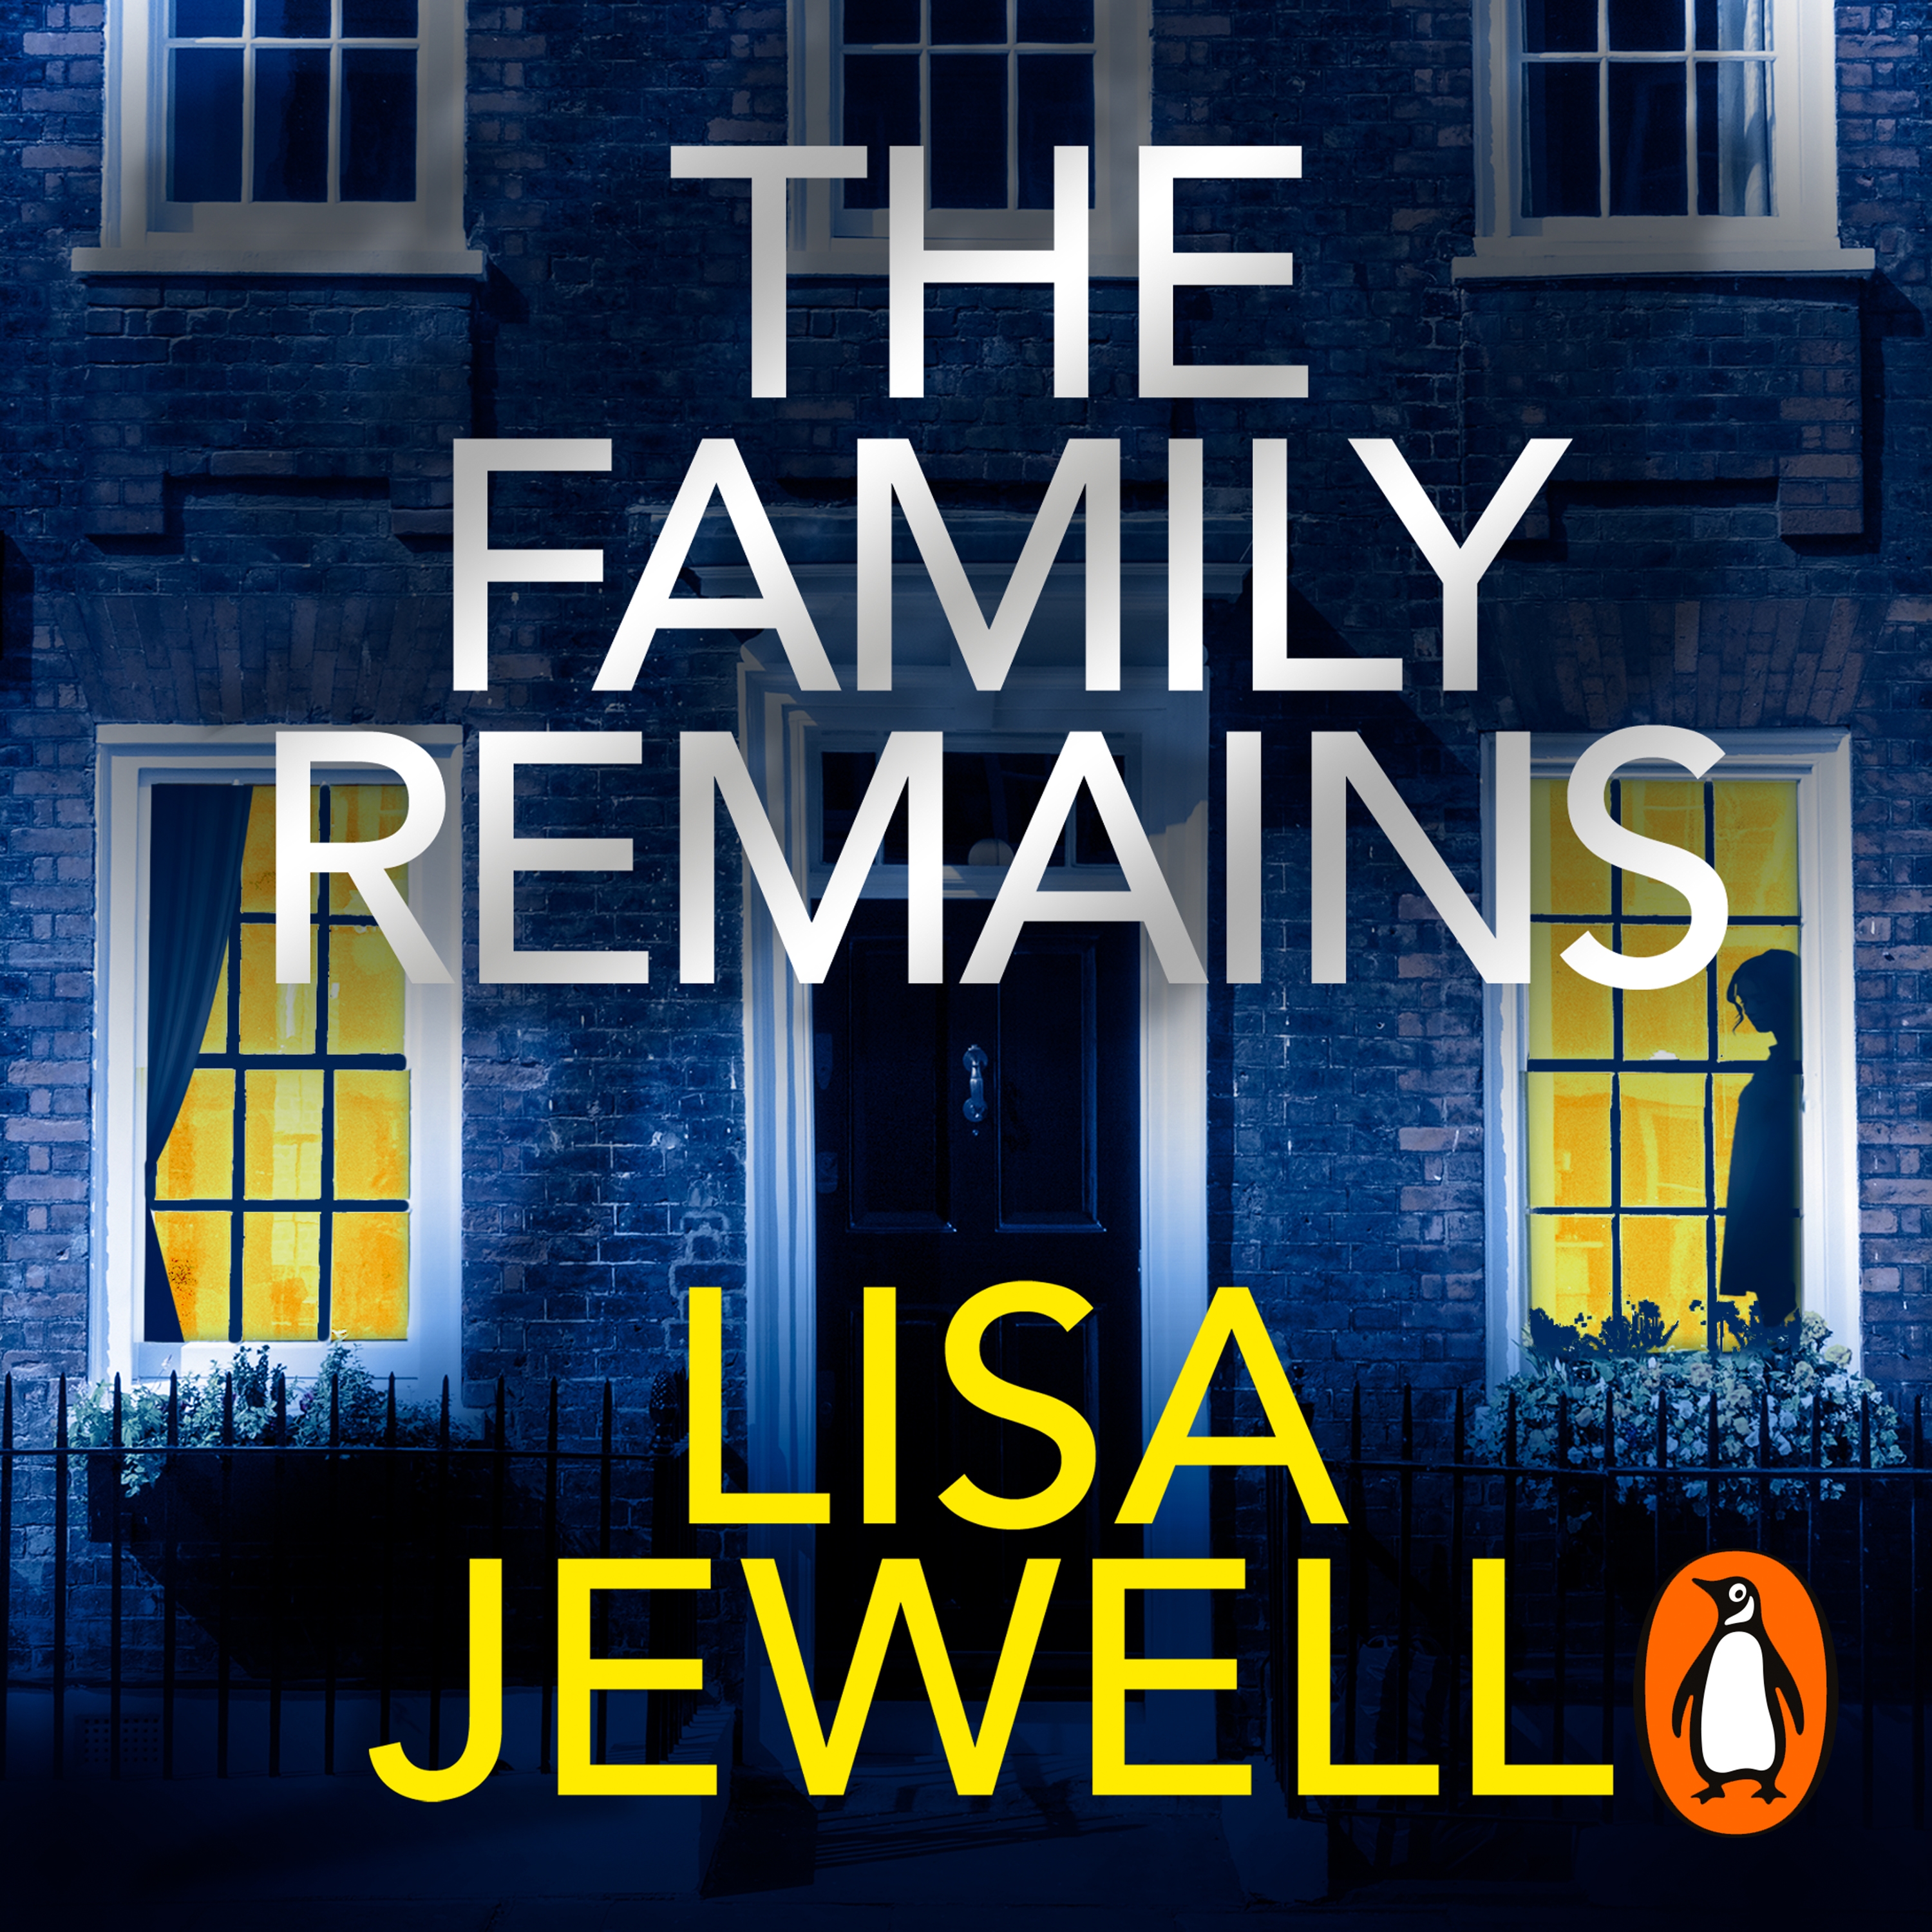 Cover of The Family Remains by Lisa Jewell. The front of a house, with the door in the middle and windows on each side. A silhouette appears on the right window. The title is in large white letters at the centre of the image, and the author's name in yellow at the bottom.